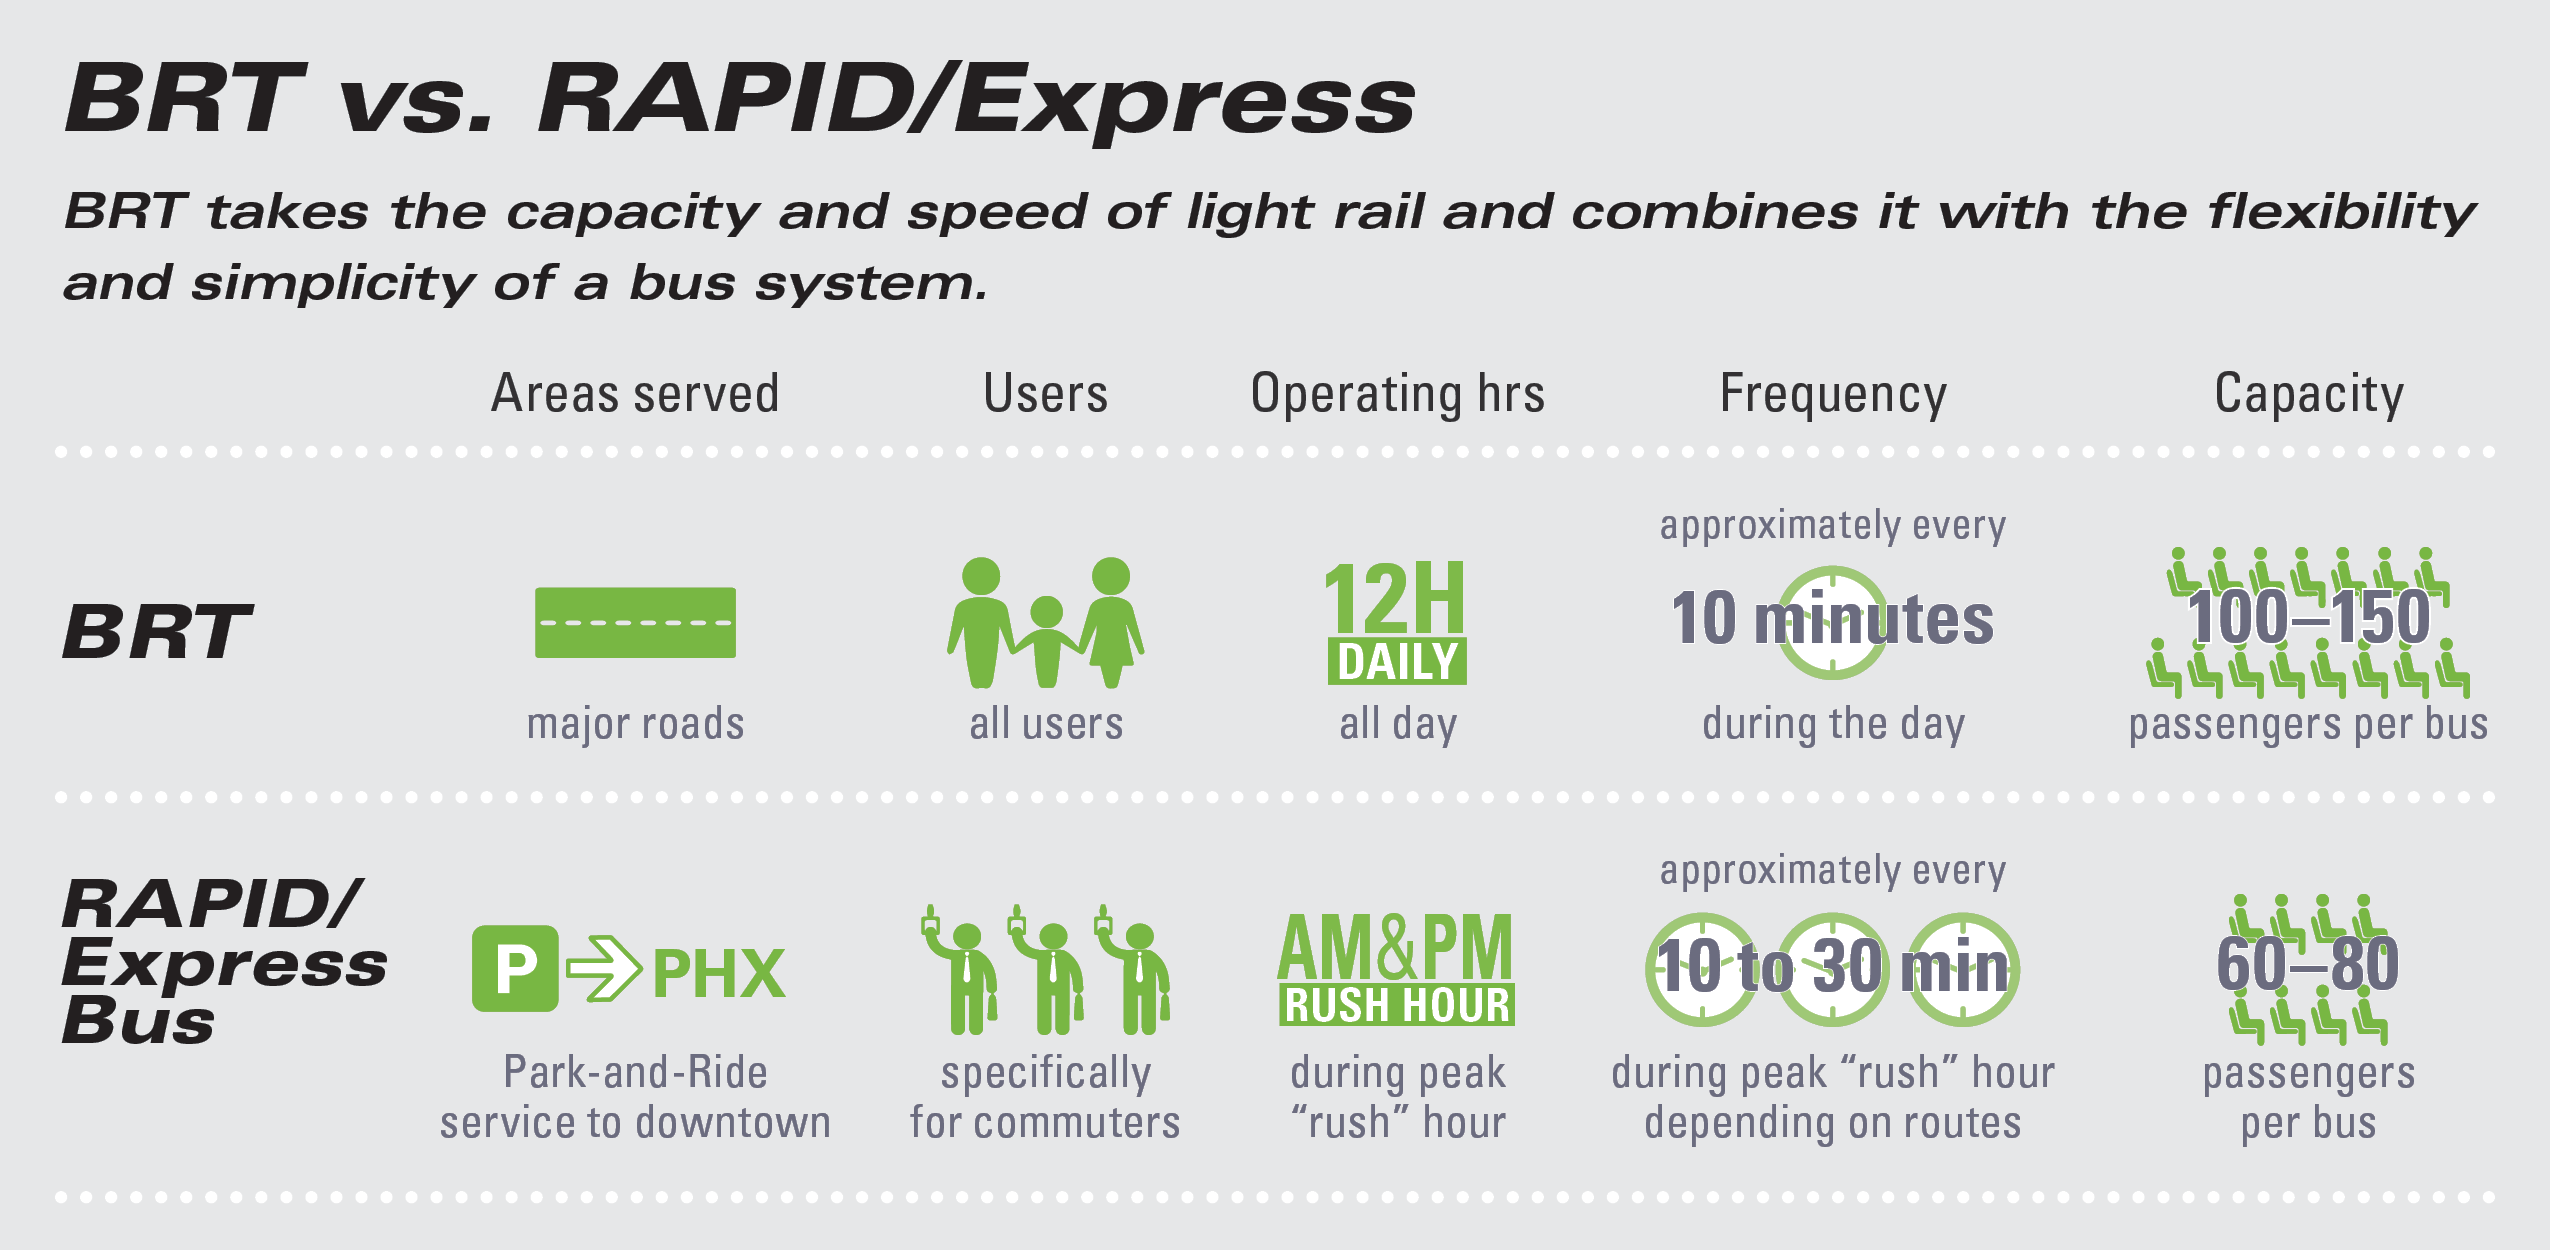 BRT versus RAPID/Express. BRT takes the capacity and speed of light rail and combines it with the flexibility and simplicity of a bus system. BRT: areas served, major roads; users, all users; operating hours, all day; frequency, approximately every 10 minutes during the day; capacity, 100 to 150 passengers per bus. RAPID/Express bus: areas served, park-and-ride service to downtown; users, specifically for commuters; operating hours, during peak a.m. and p.m. 'rush' hour; frequency, approximately every 10 to 30 minutes during peak 'rush' hour depending on routes; capacity, 60 to 80 passengers per bus